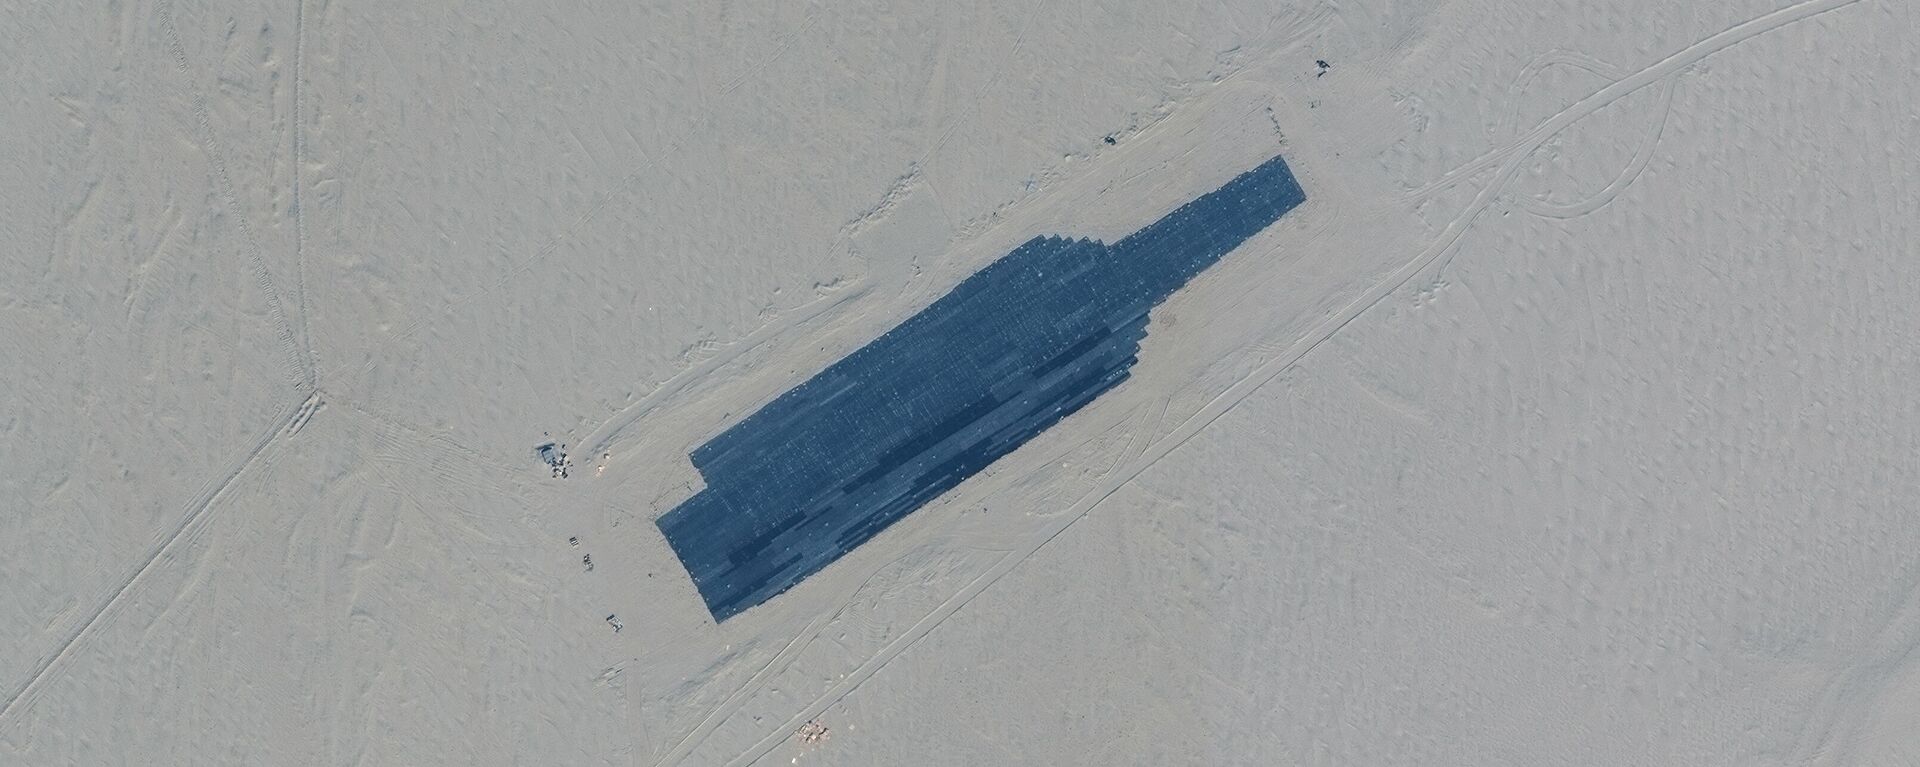 This handout satellite image released by Maxar Technologies on November 8, 2021 shows a target depicting an aircraft carrier in Ruoqiang county in the Taklamakan Desert, in China's western Xinjiang region on October 20, 2021 - Sputnik International, 1920, 08.11.2021